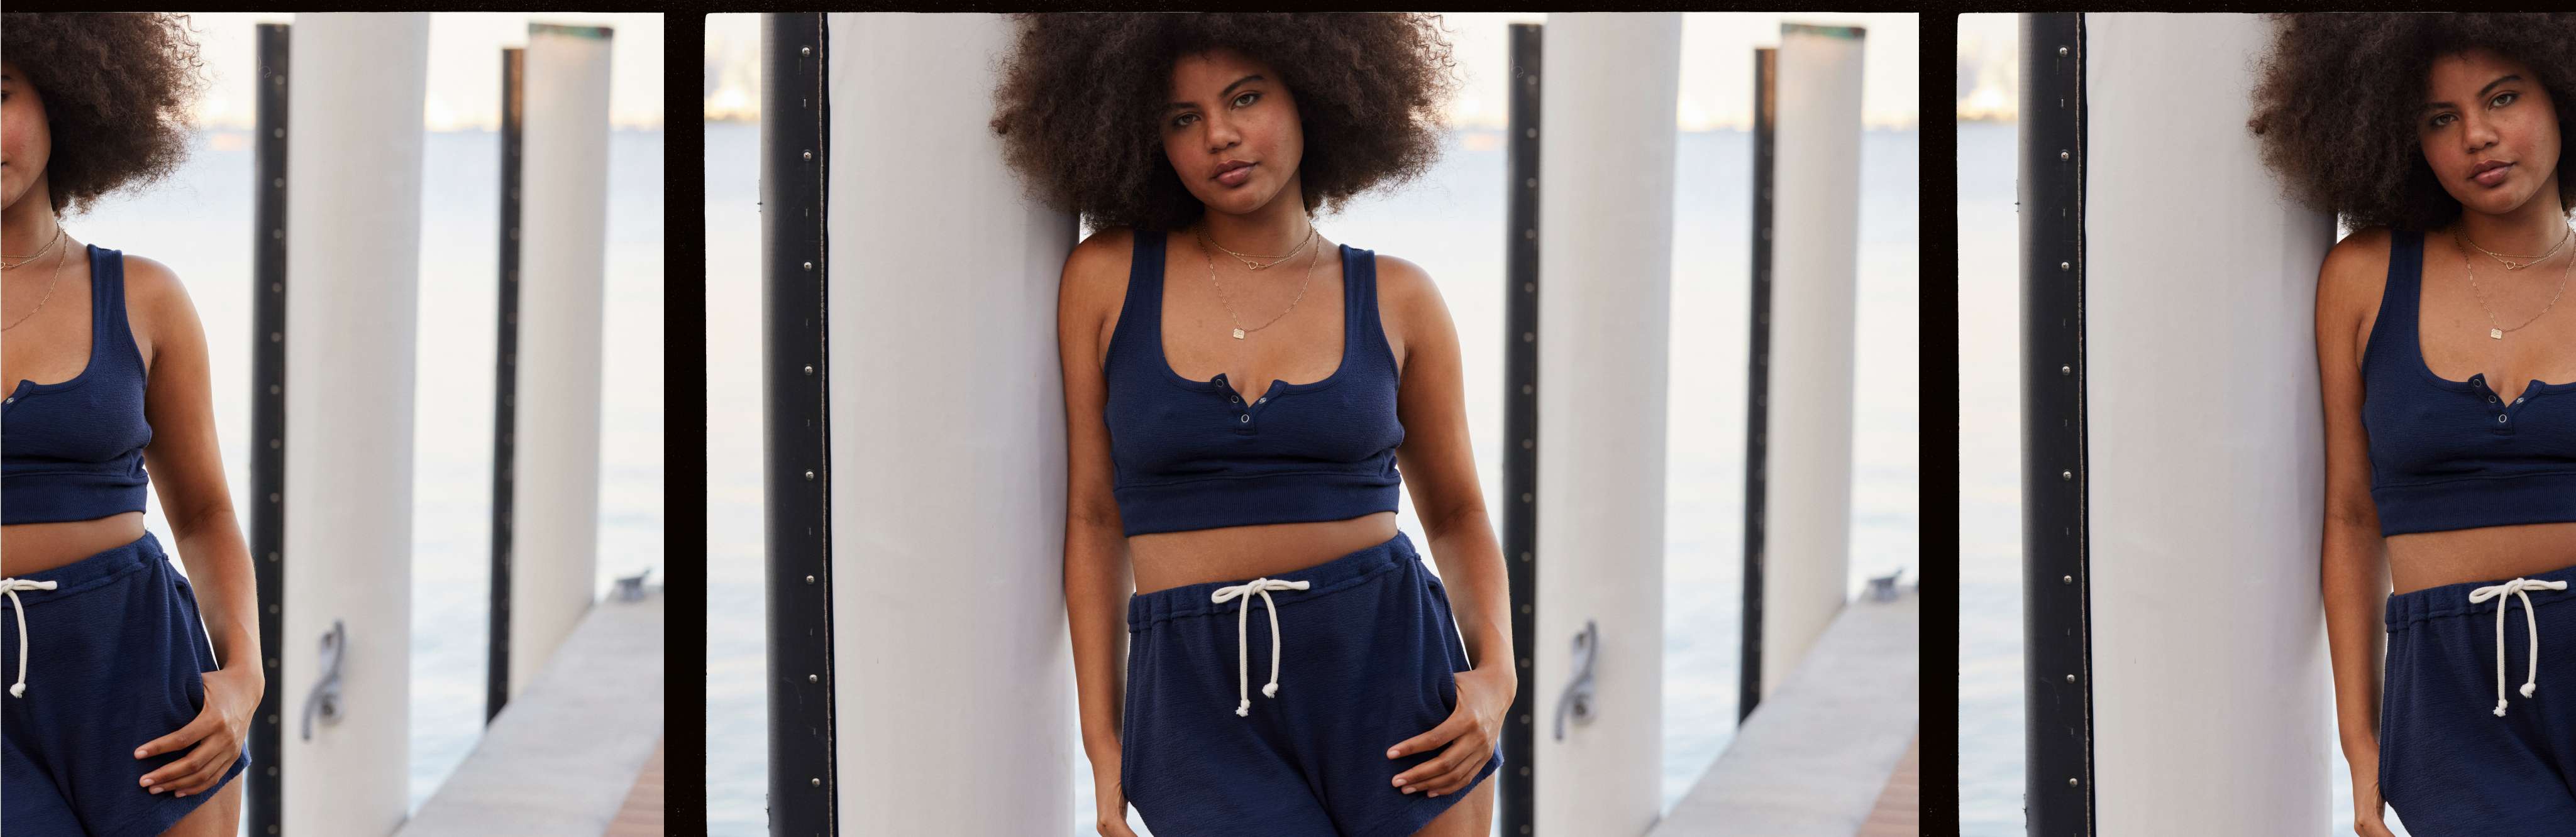 https://s7d2.scene7.com/is/image/aeo/20240215-SP2-aerie-static-CLOTHING-matching-lg?defaultImage=20240215-SP2-aerie-static-CLOTHING-matching-lg&scl=1&qlt=60&fmt=jpeg